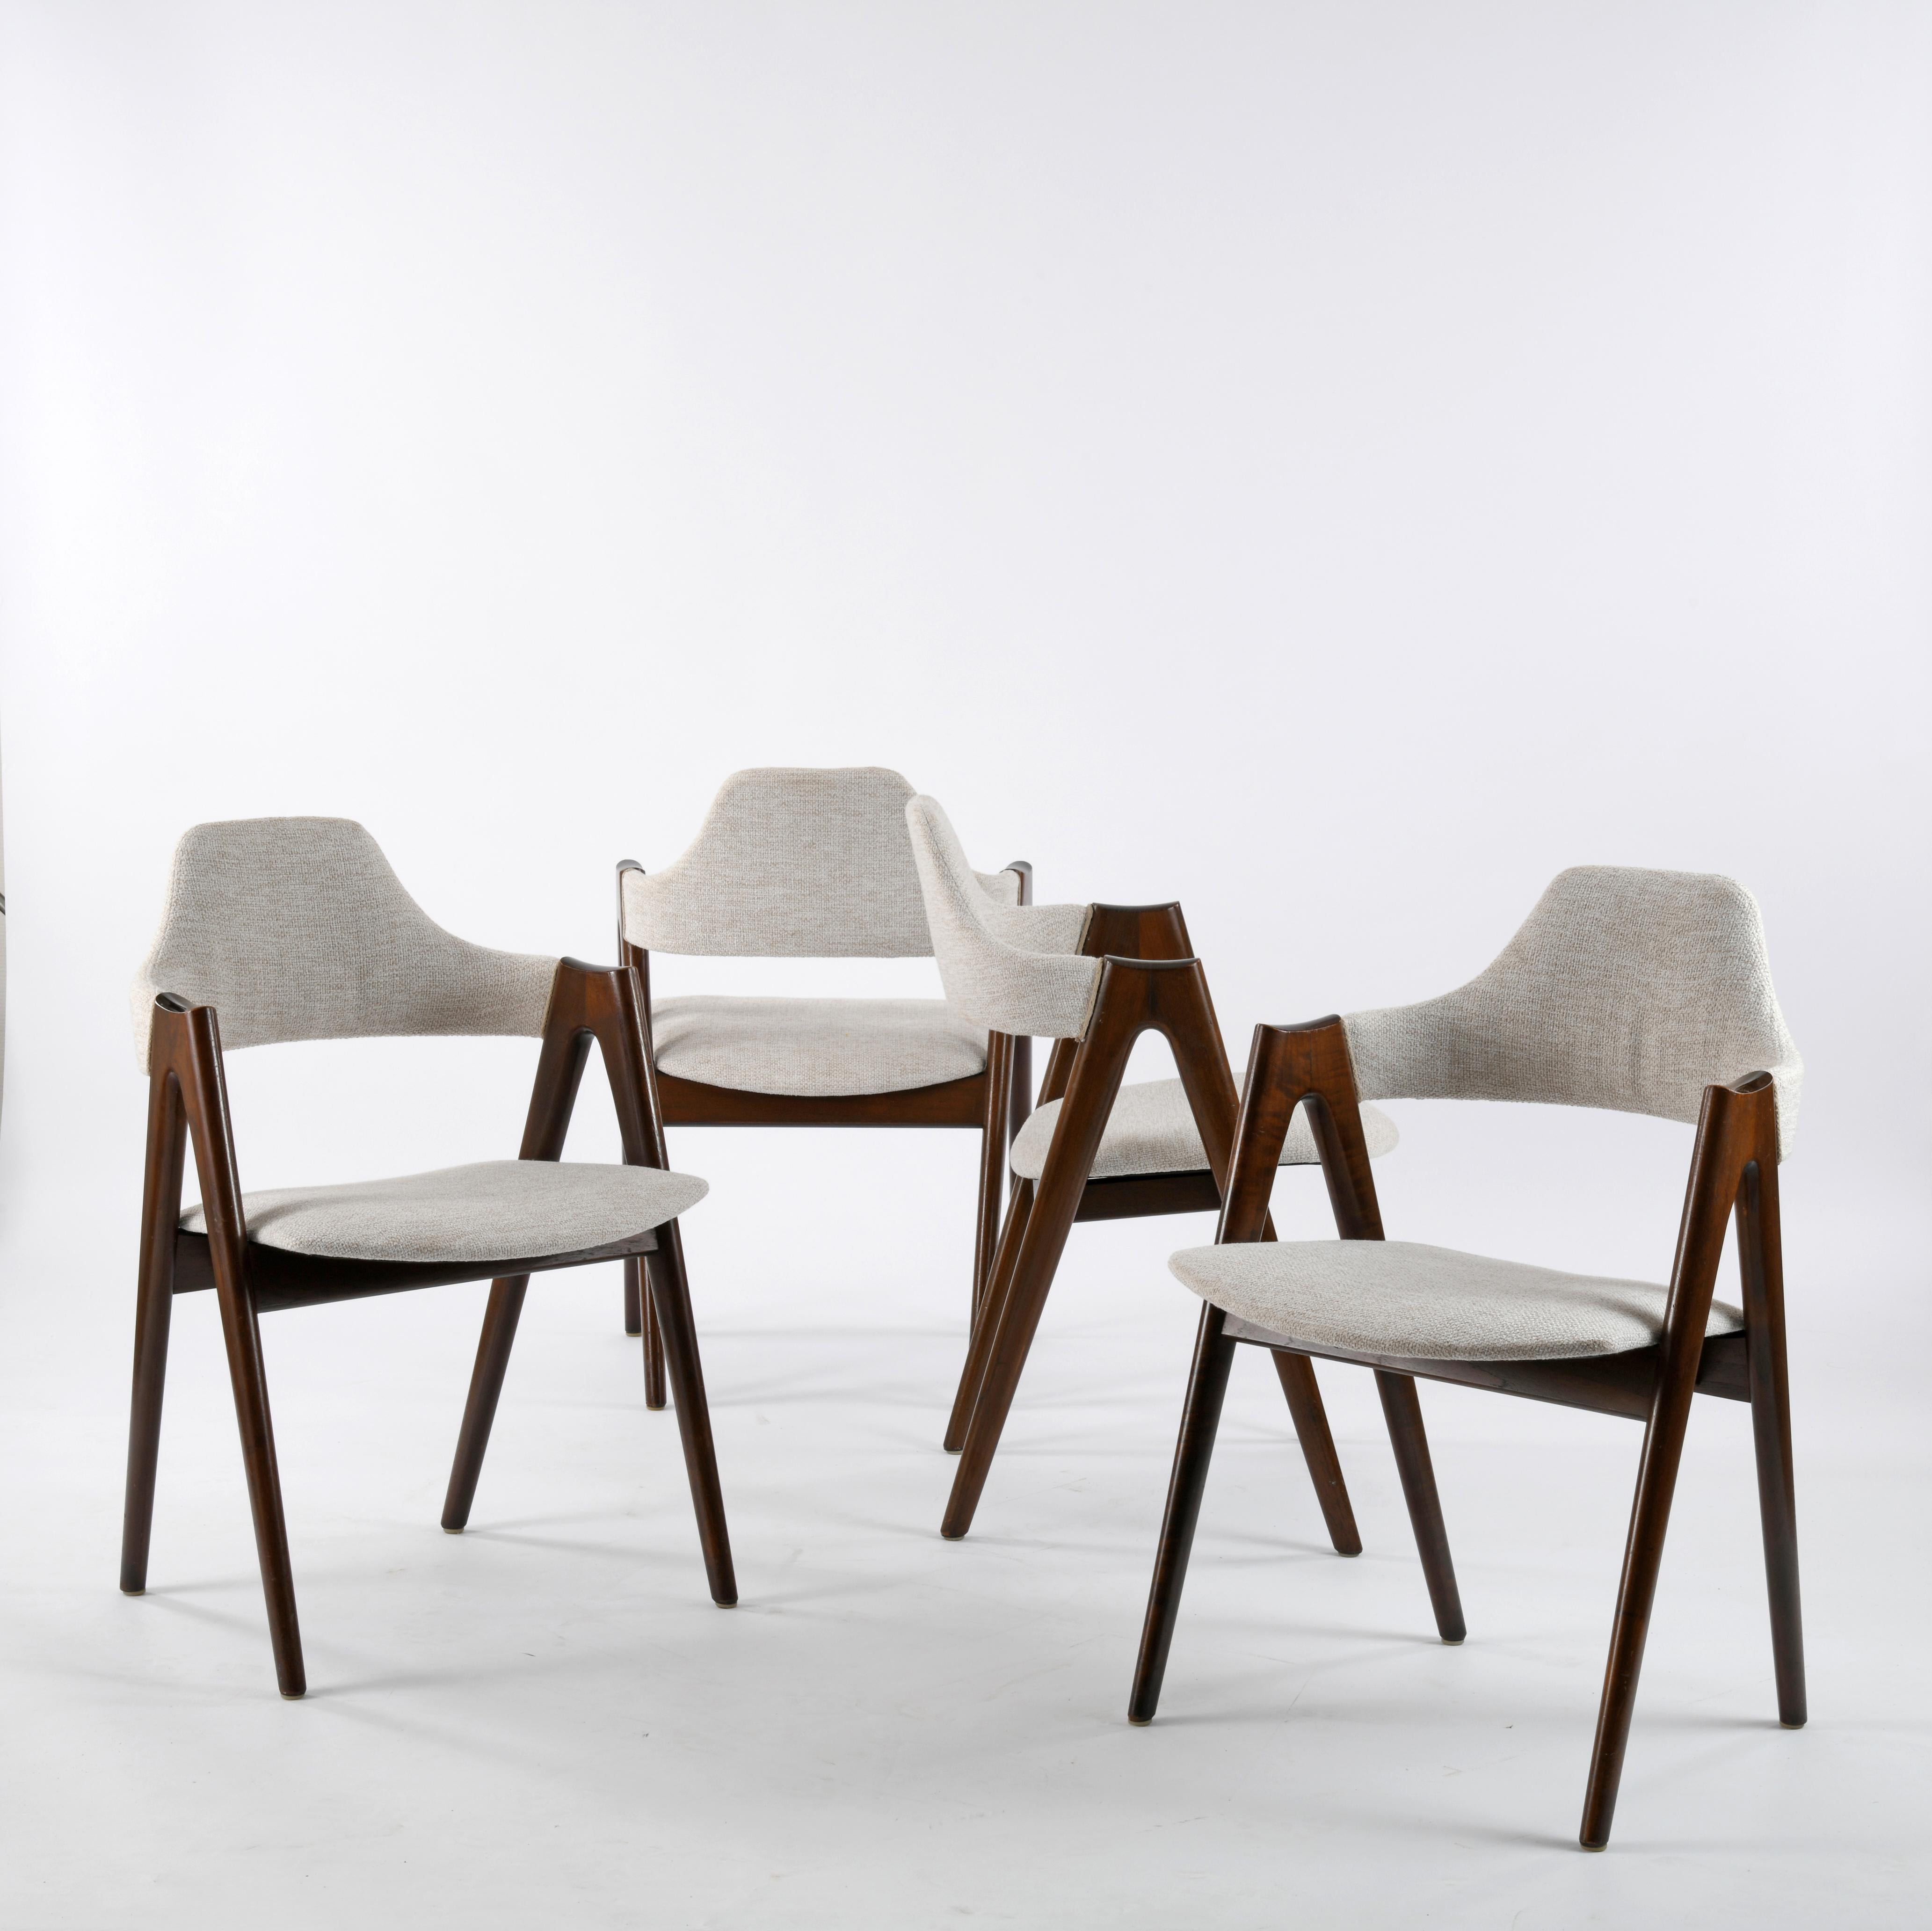 Suite of 4 chairs, design by Kai Kristiansen (1929-) in 1956 edition Shou Andersen Møbelfabrik in Denmark. This is the model 86, also called 